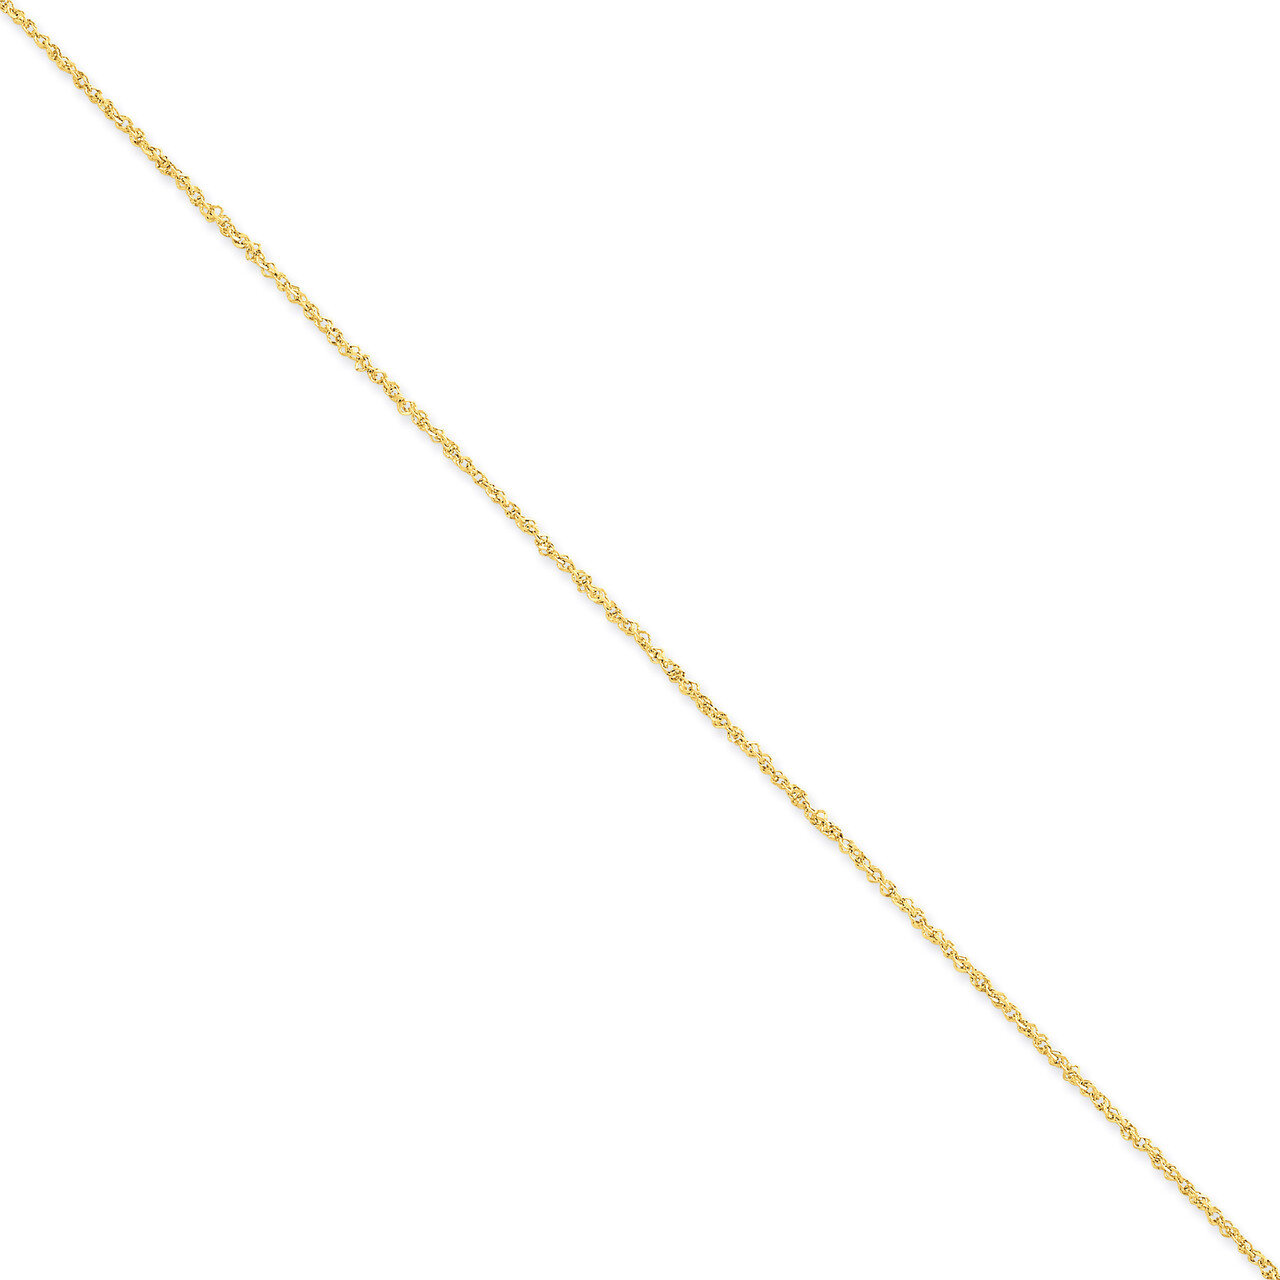 1.7mm Ropa Chain 14 Inch 14k Gold RPA028-14